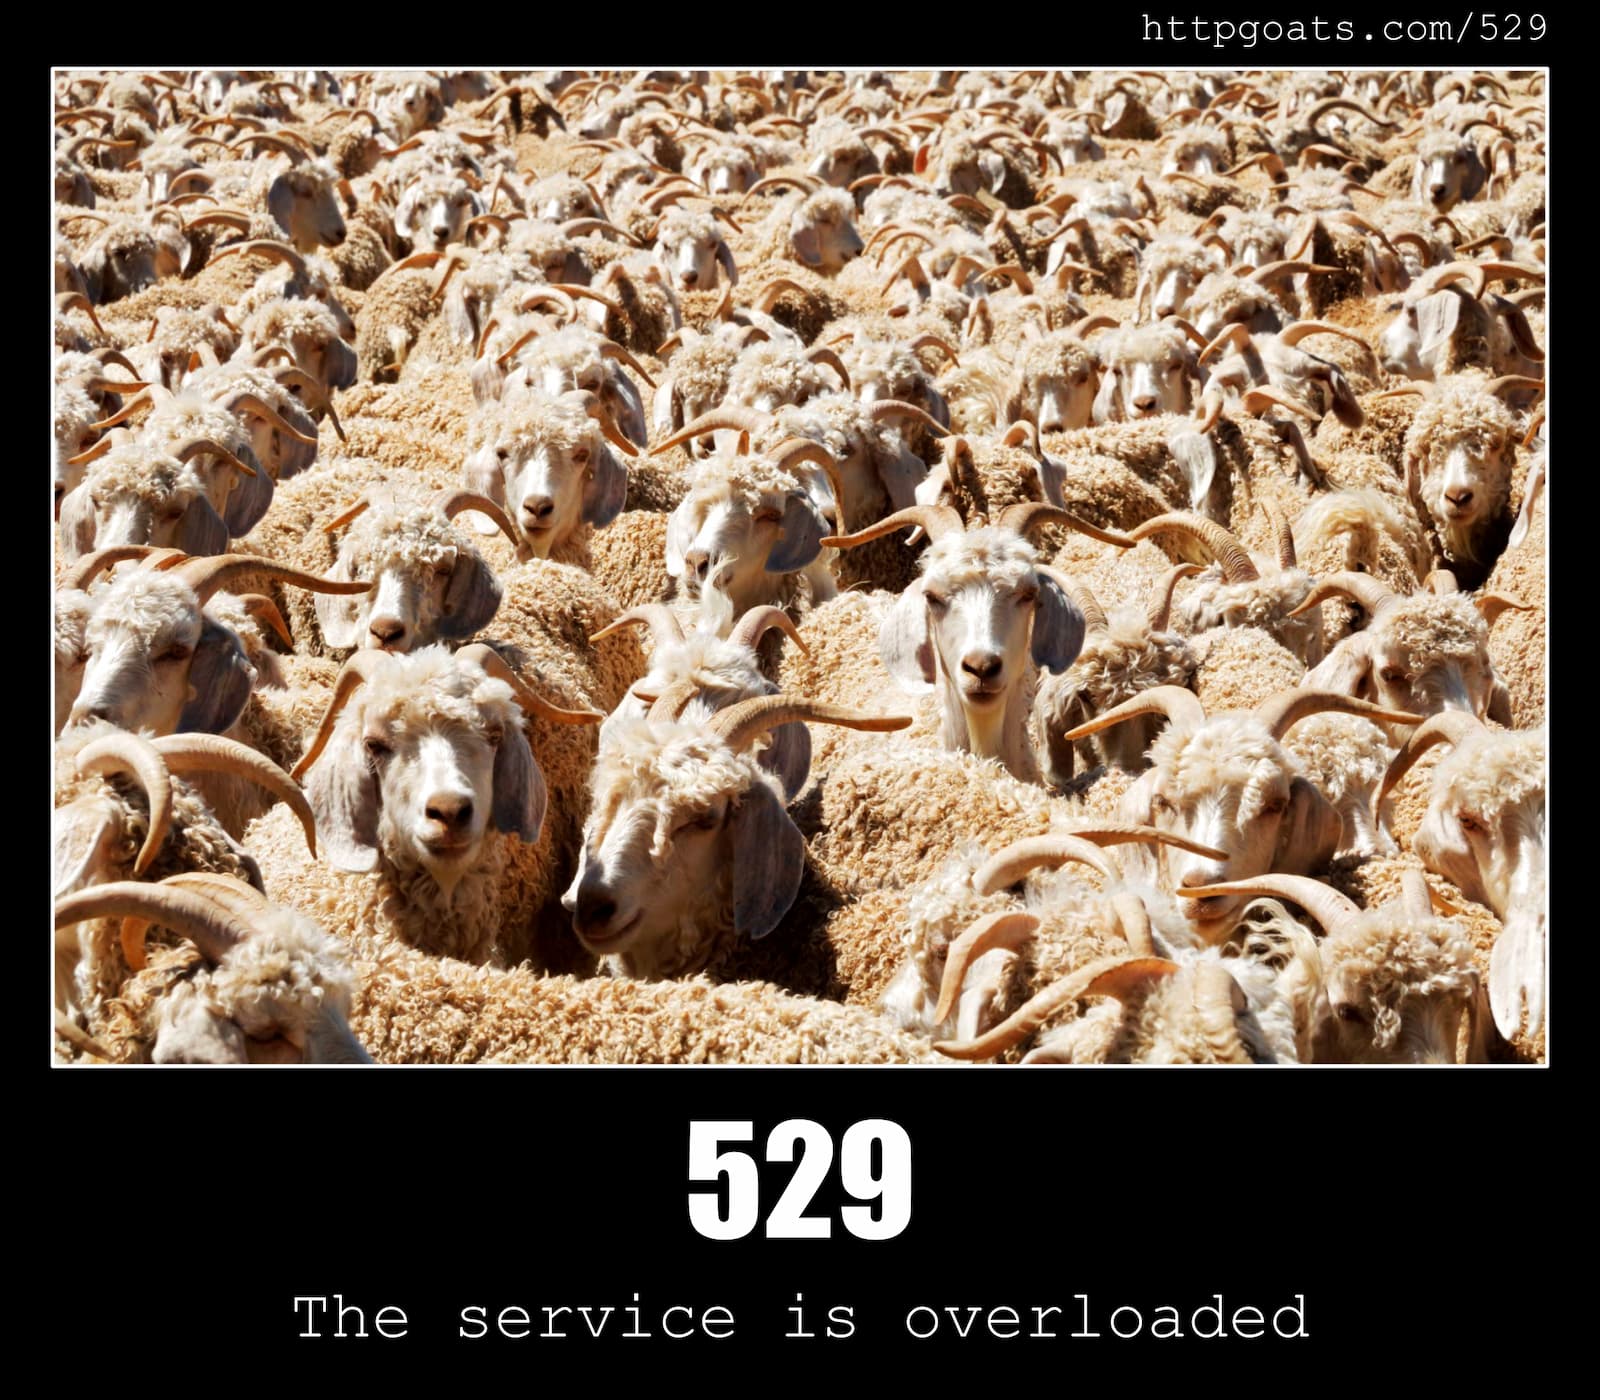 HTTP Status Code 529 The service is overloaded & Goats